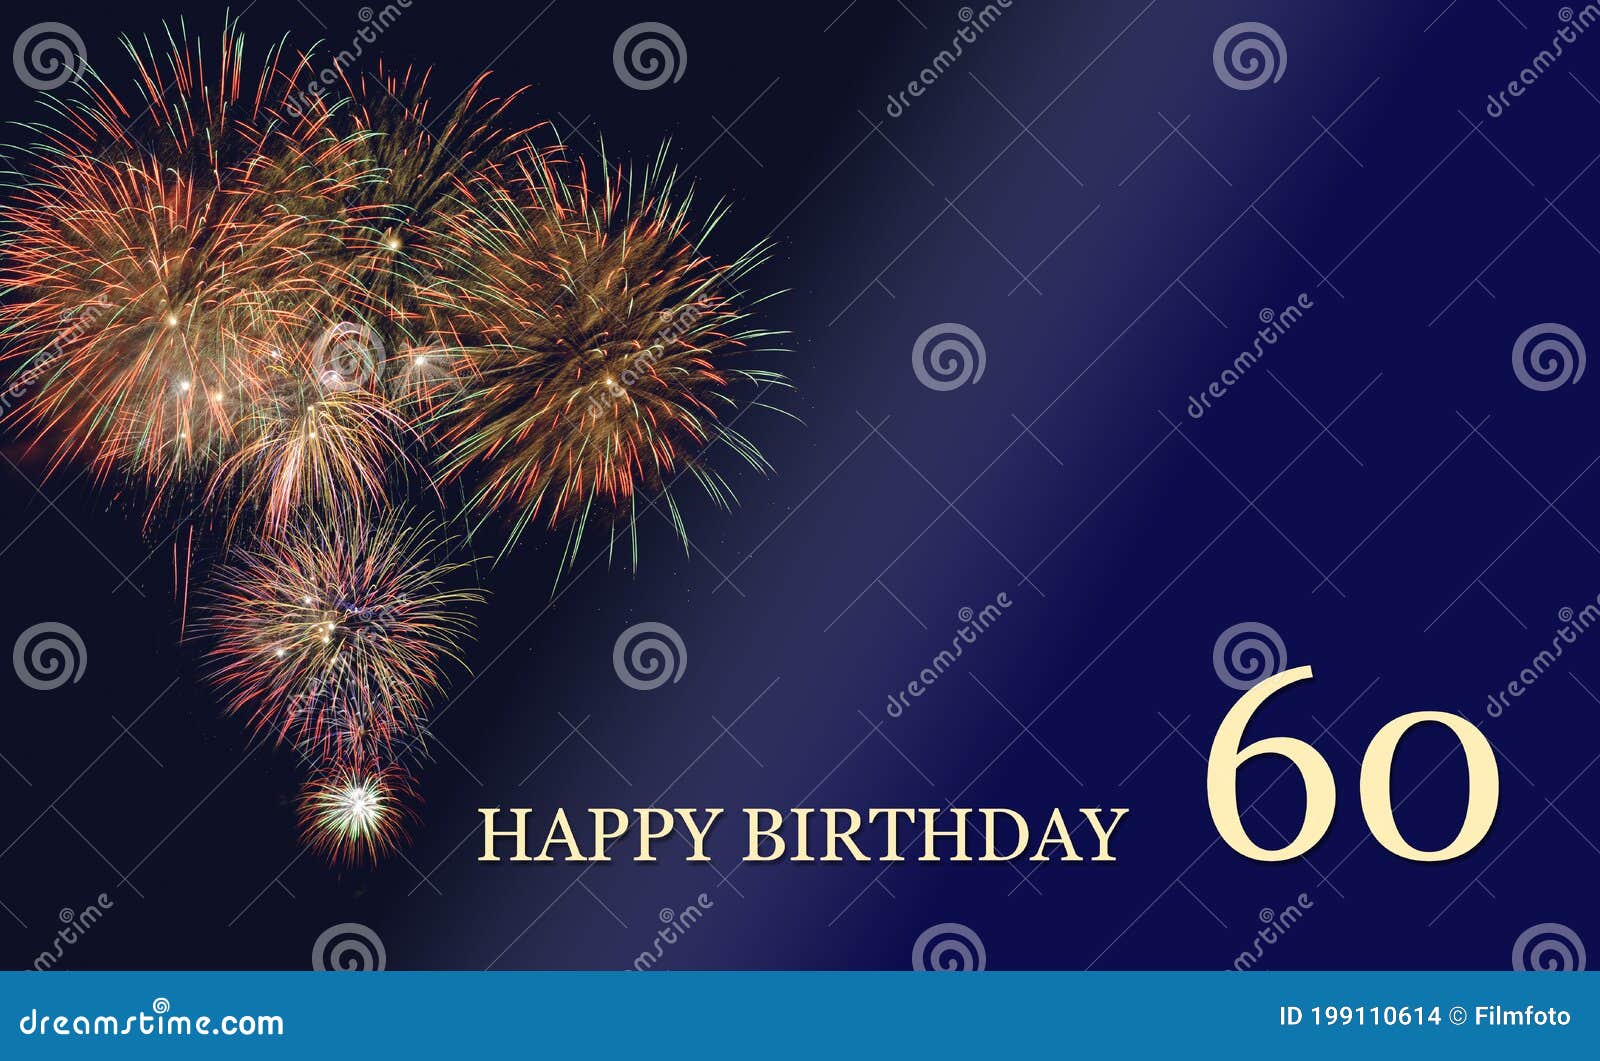 Congratulations To the 60th Birthday Stock Photo - Image of ...